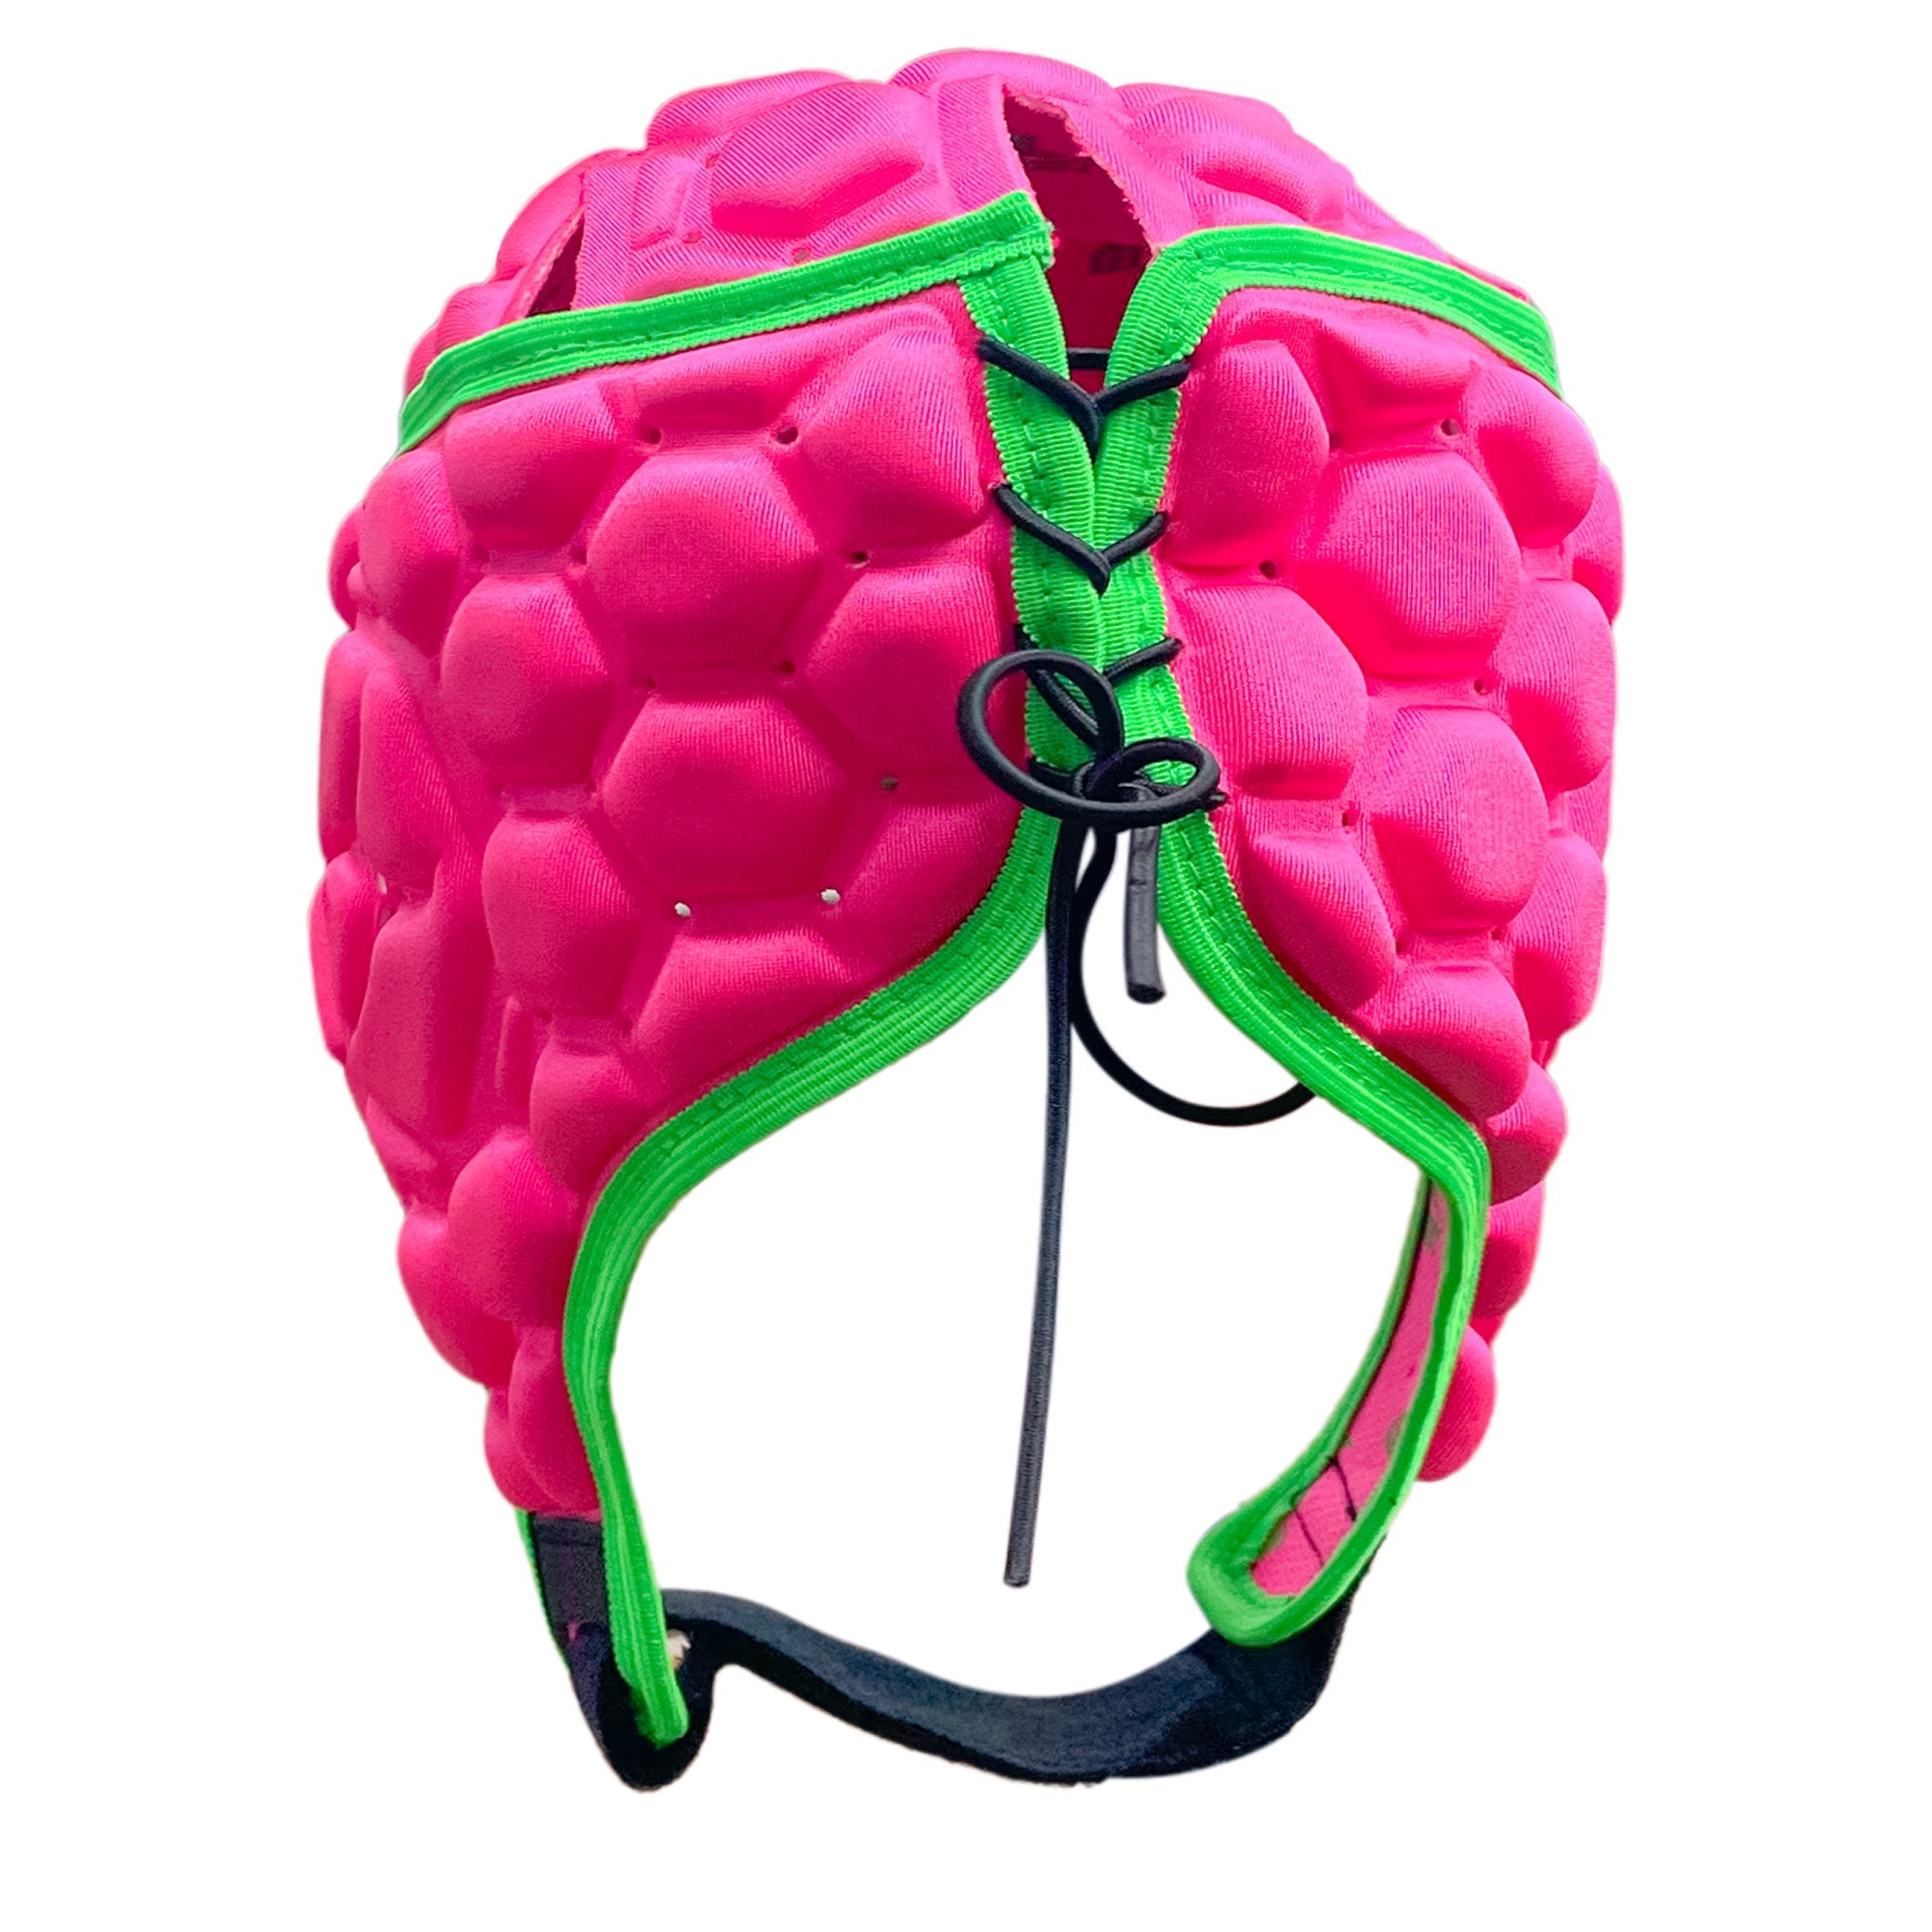 CASCO RUGBY ROSA